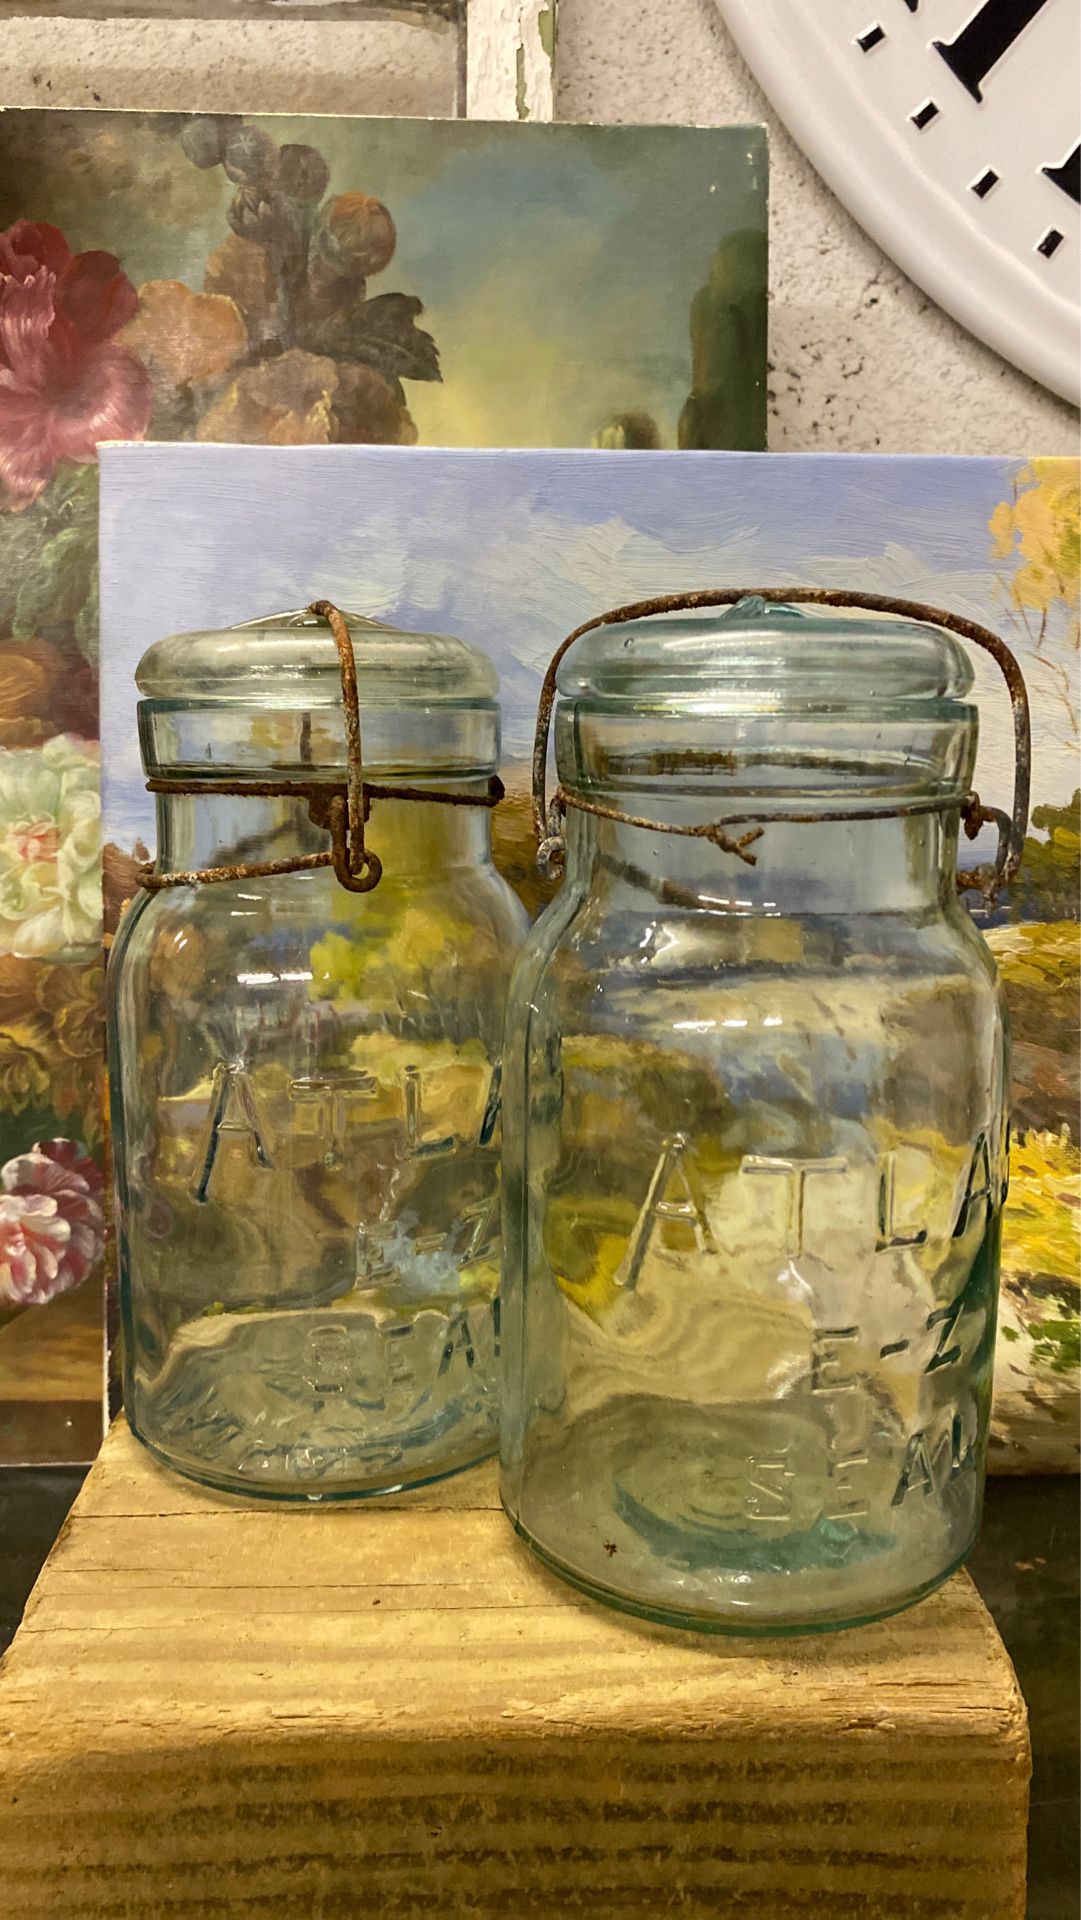 2 vintage glass Atlas jars,clear light blue tint glass containers,8 x 4”, rustic decor,storage